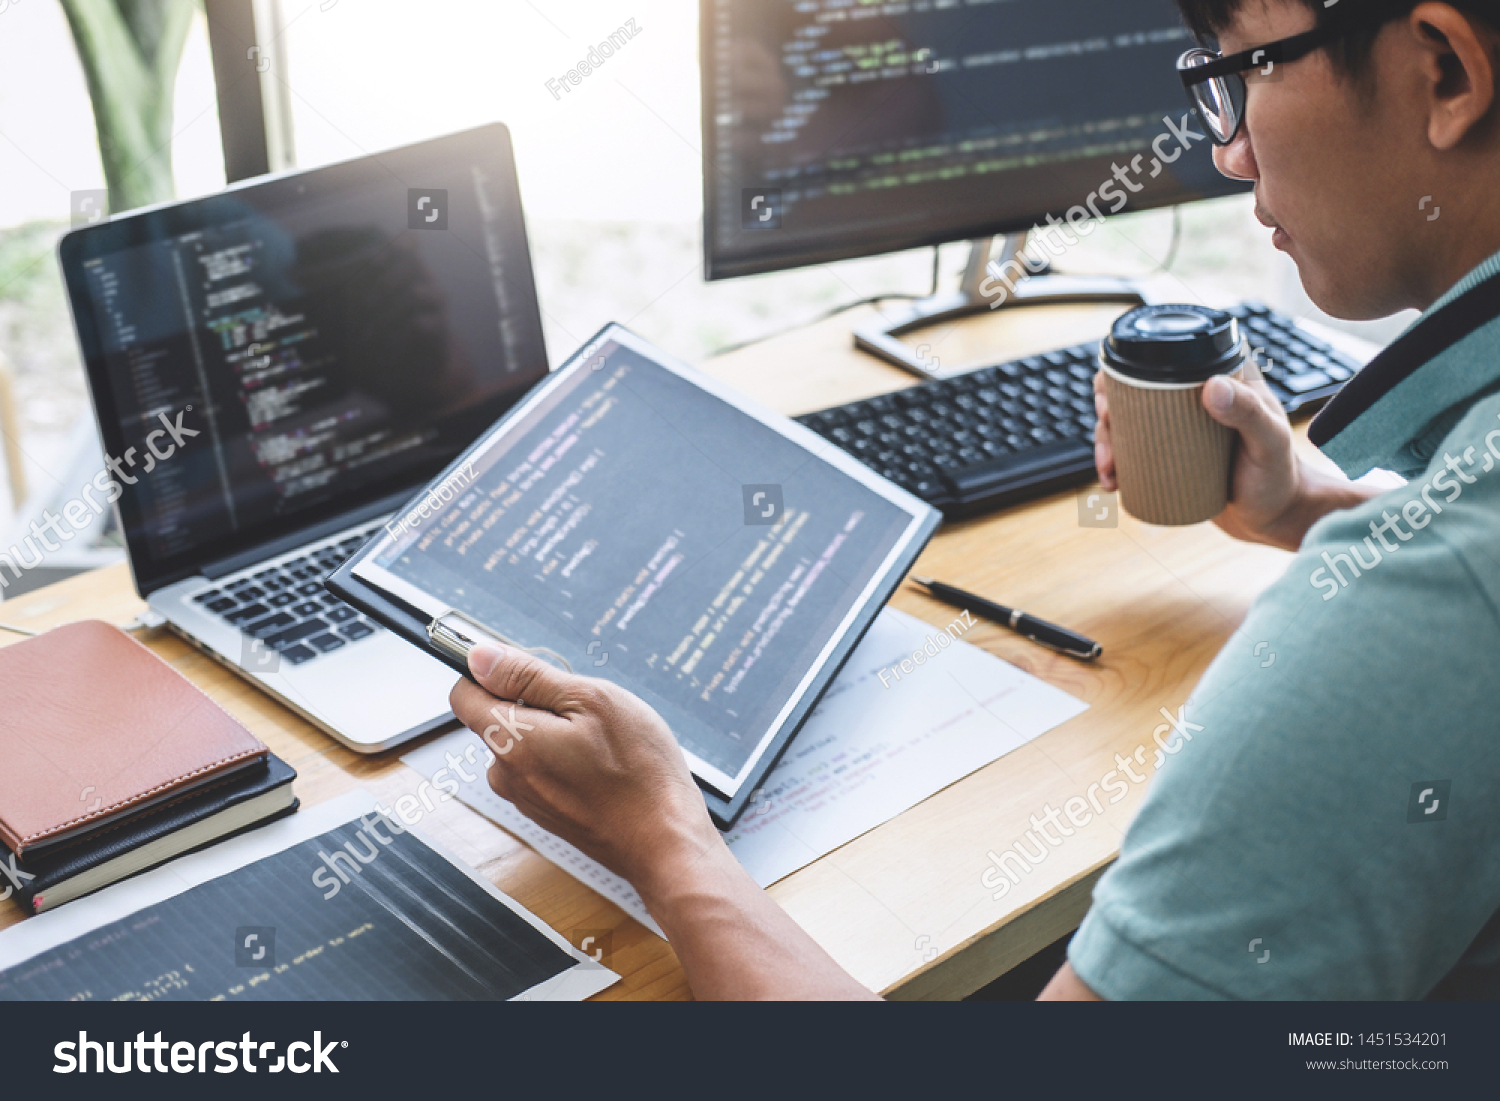 Young Professional programmer working at developing programming and website working in a software develop company office, writing codes and typing data code, Programming with HTML, PHP and javascript. #1451534201